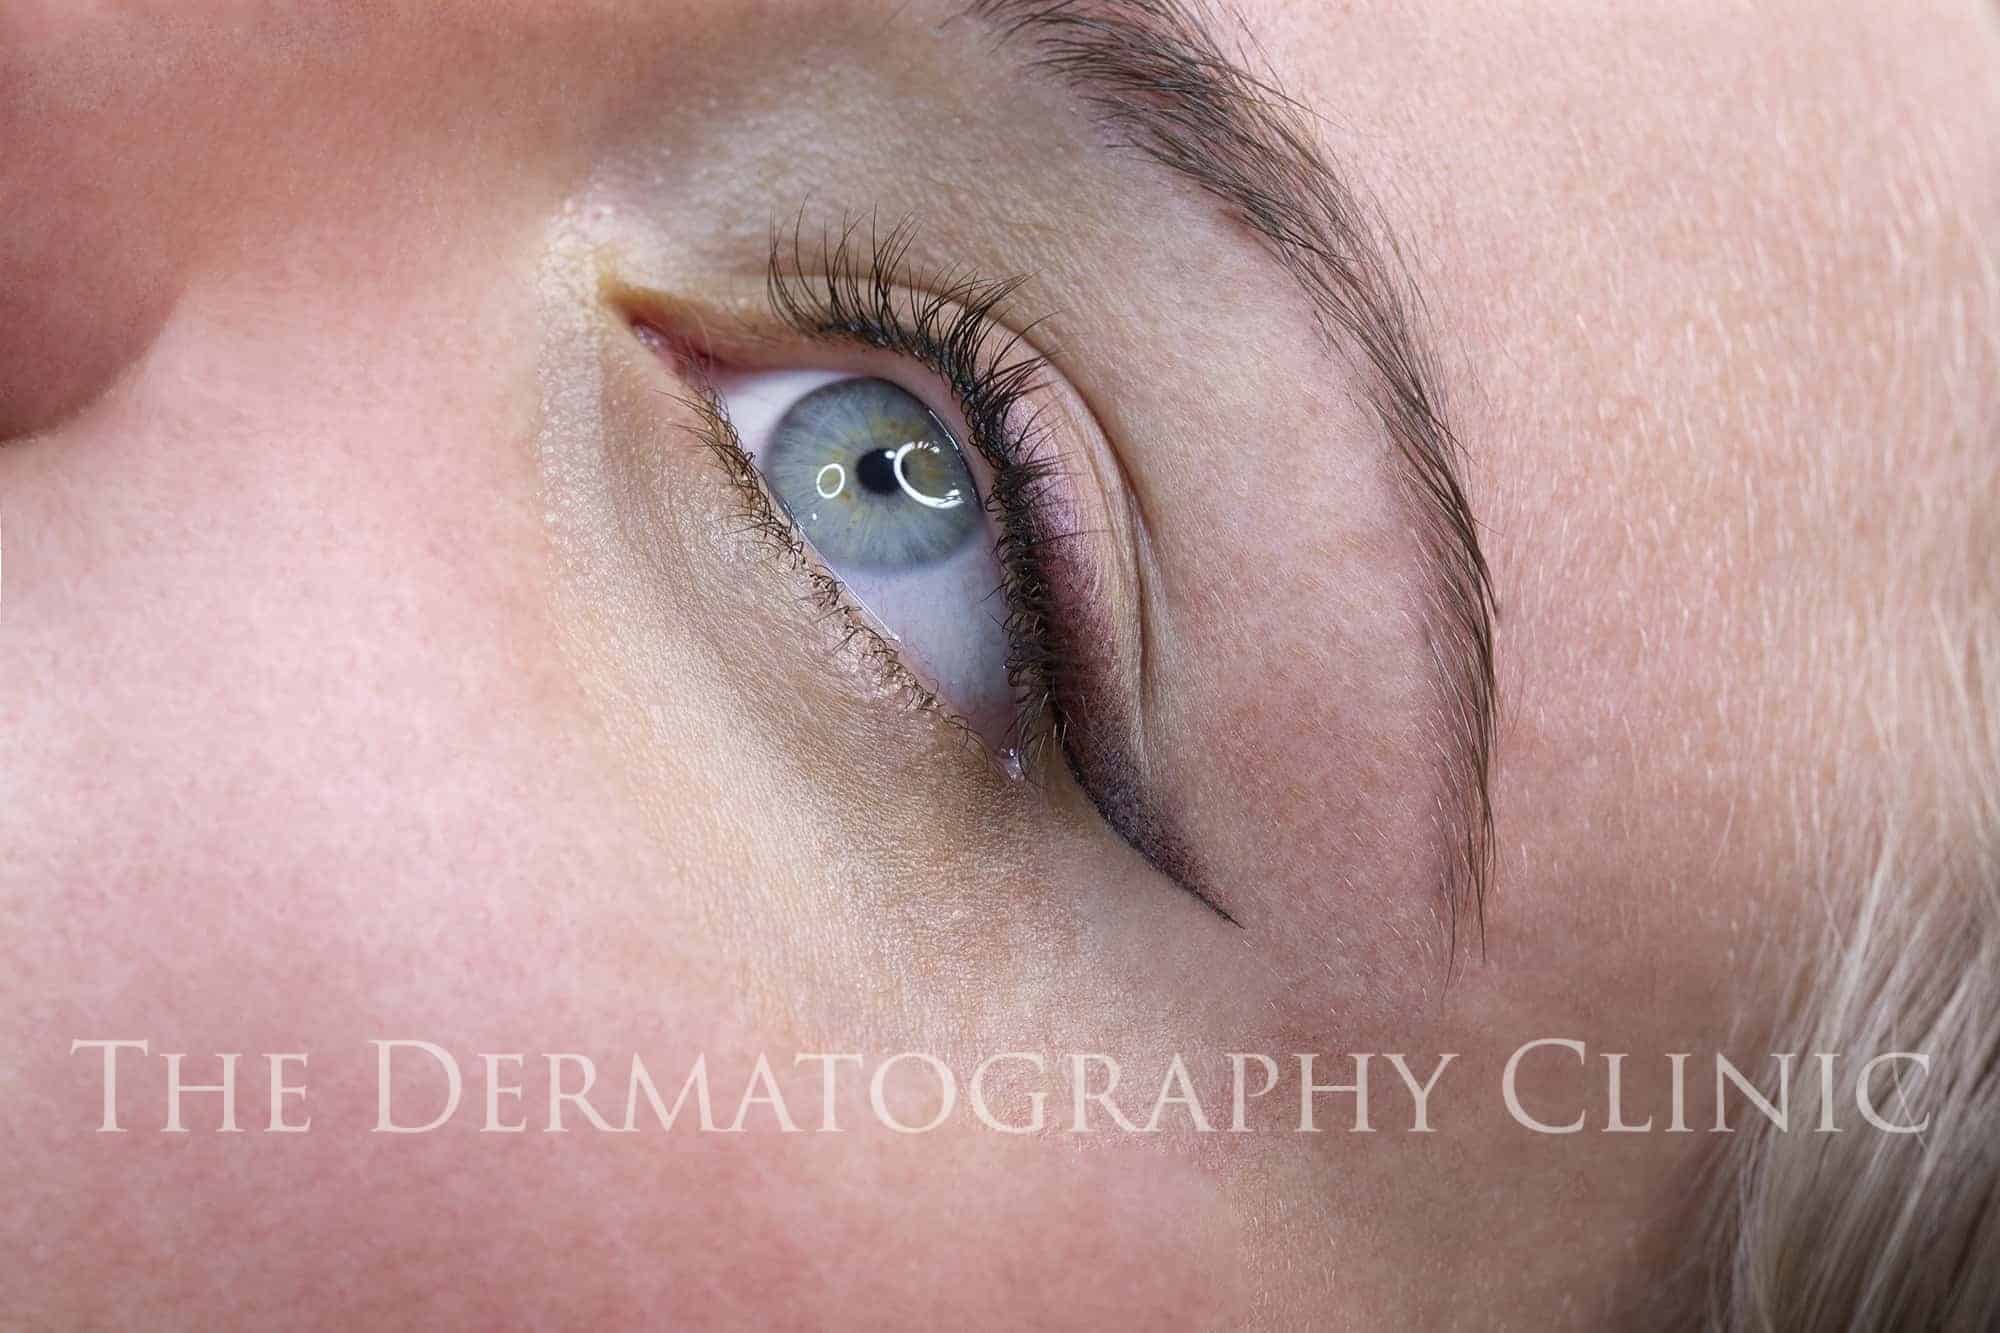 Semi-Permanent Makeup in Yuma AZ: The Best Options for You